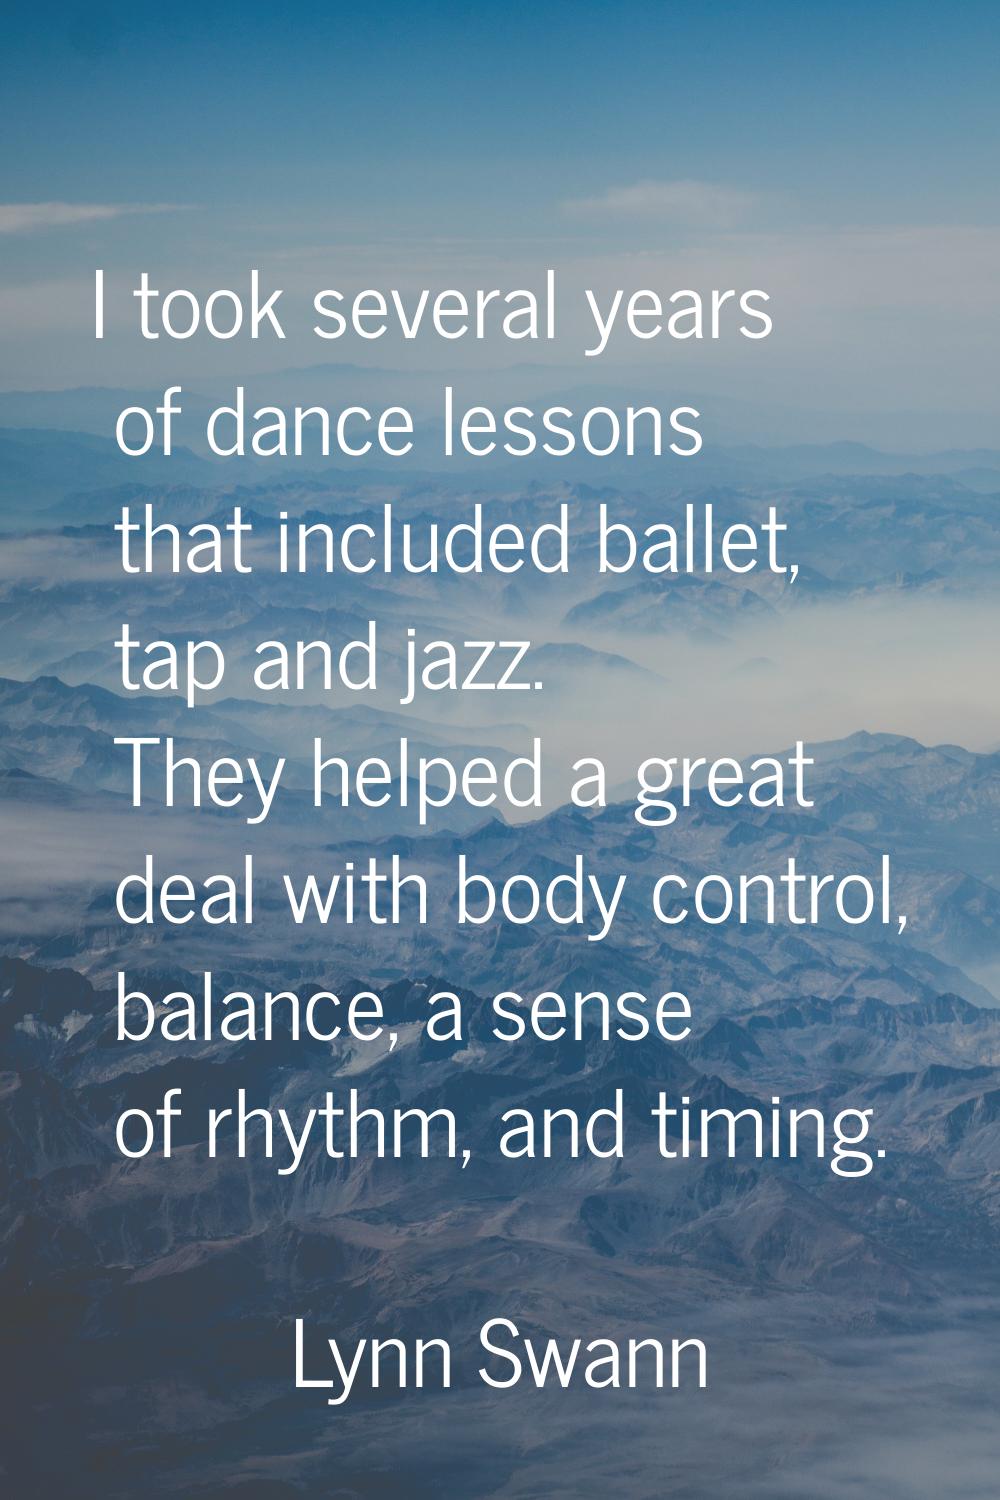 I took several years of dance lessons that included ballet, tap and jazz. They helped a great deal 